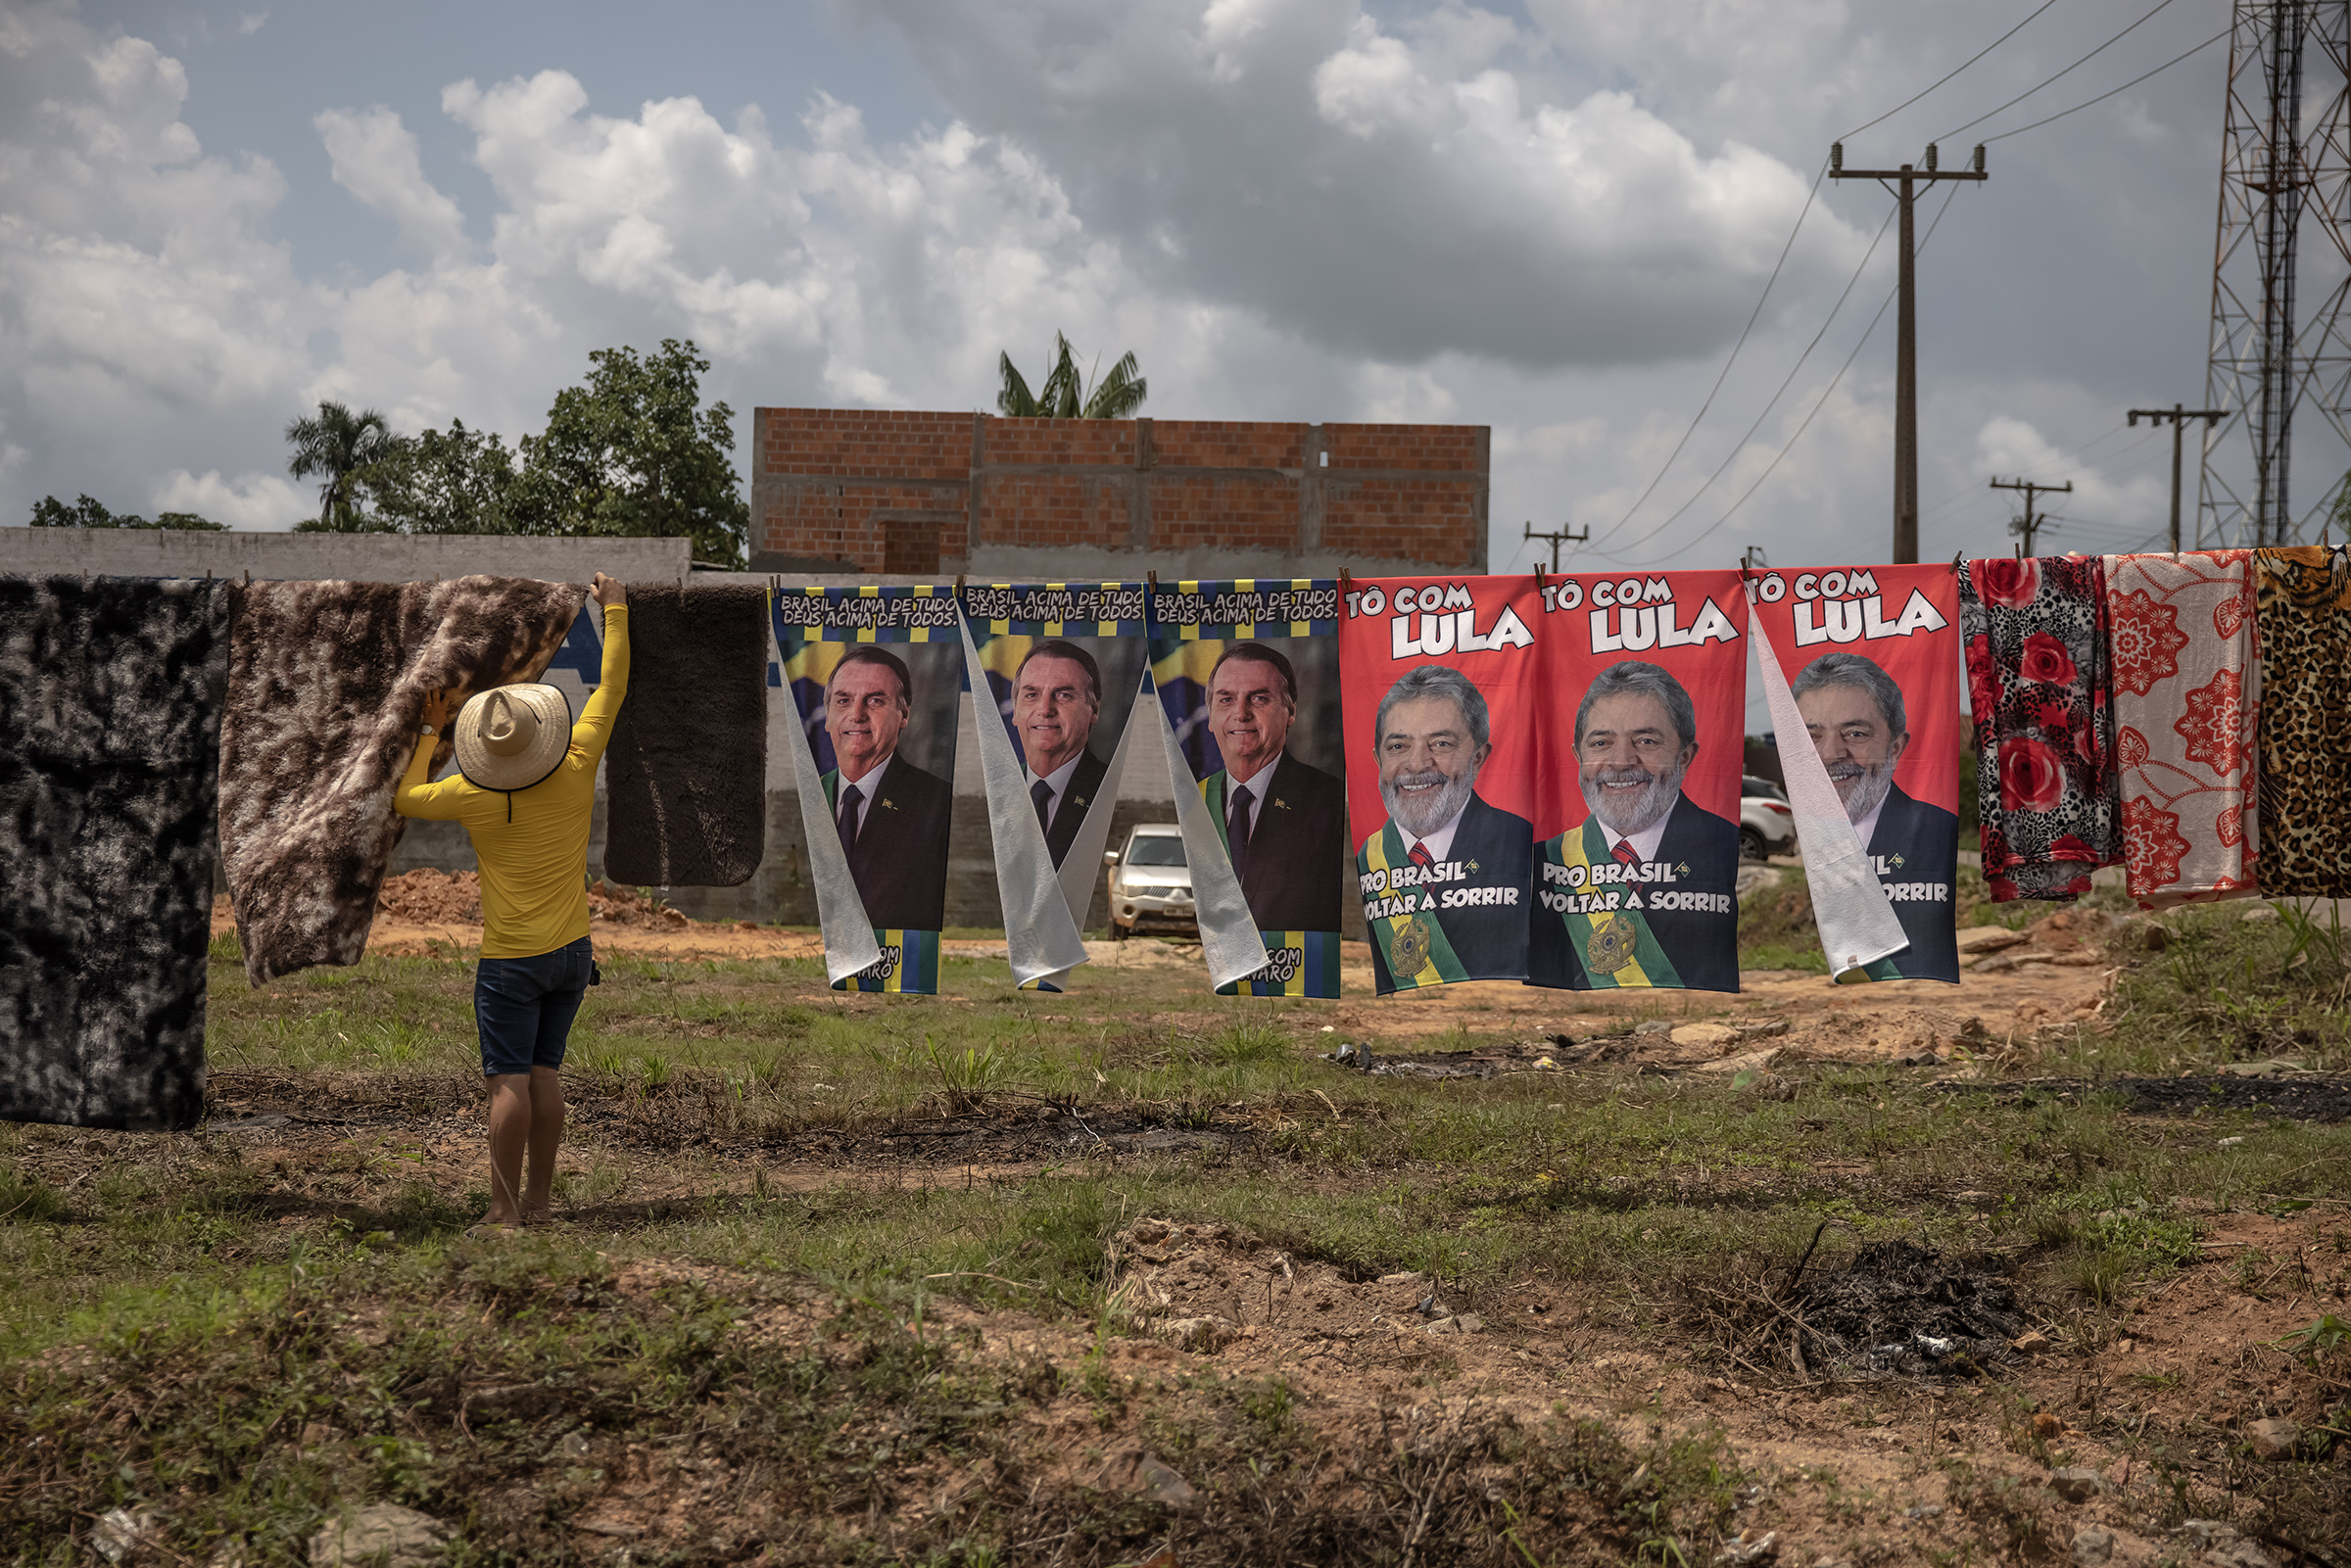 A street vendor sells towels with images of Bolsonaro and Lula near Eldorado dos Carajás in September 2021. (Jonne Roriz—Bloomberg/Getty Images)